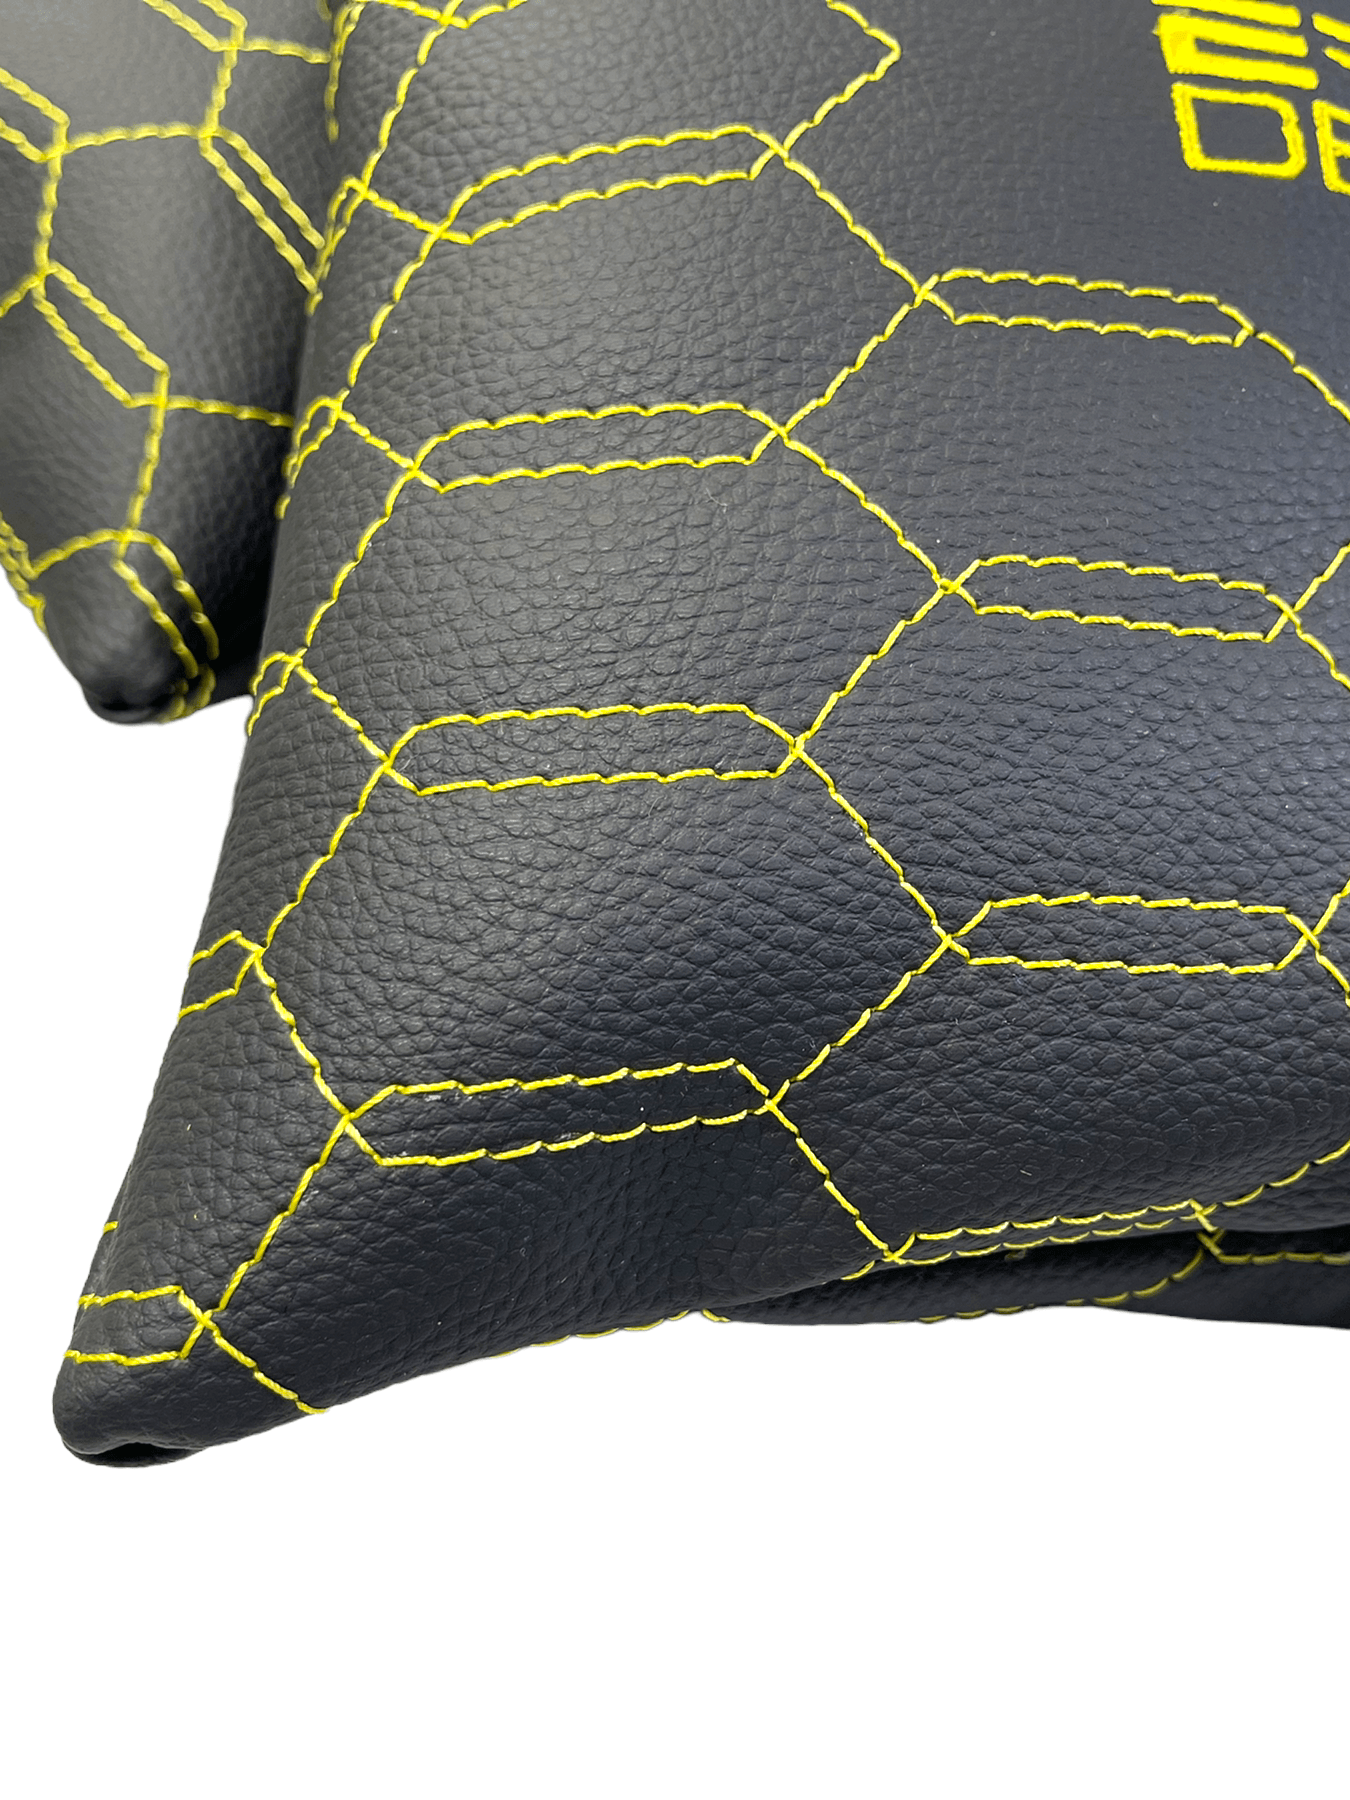 Black Leather Pillows ER56 Design Set of 2 Yellow Sewing - AutoWin